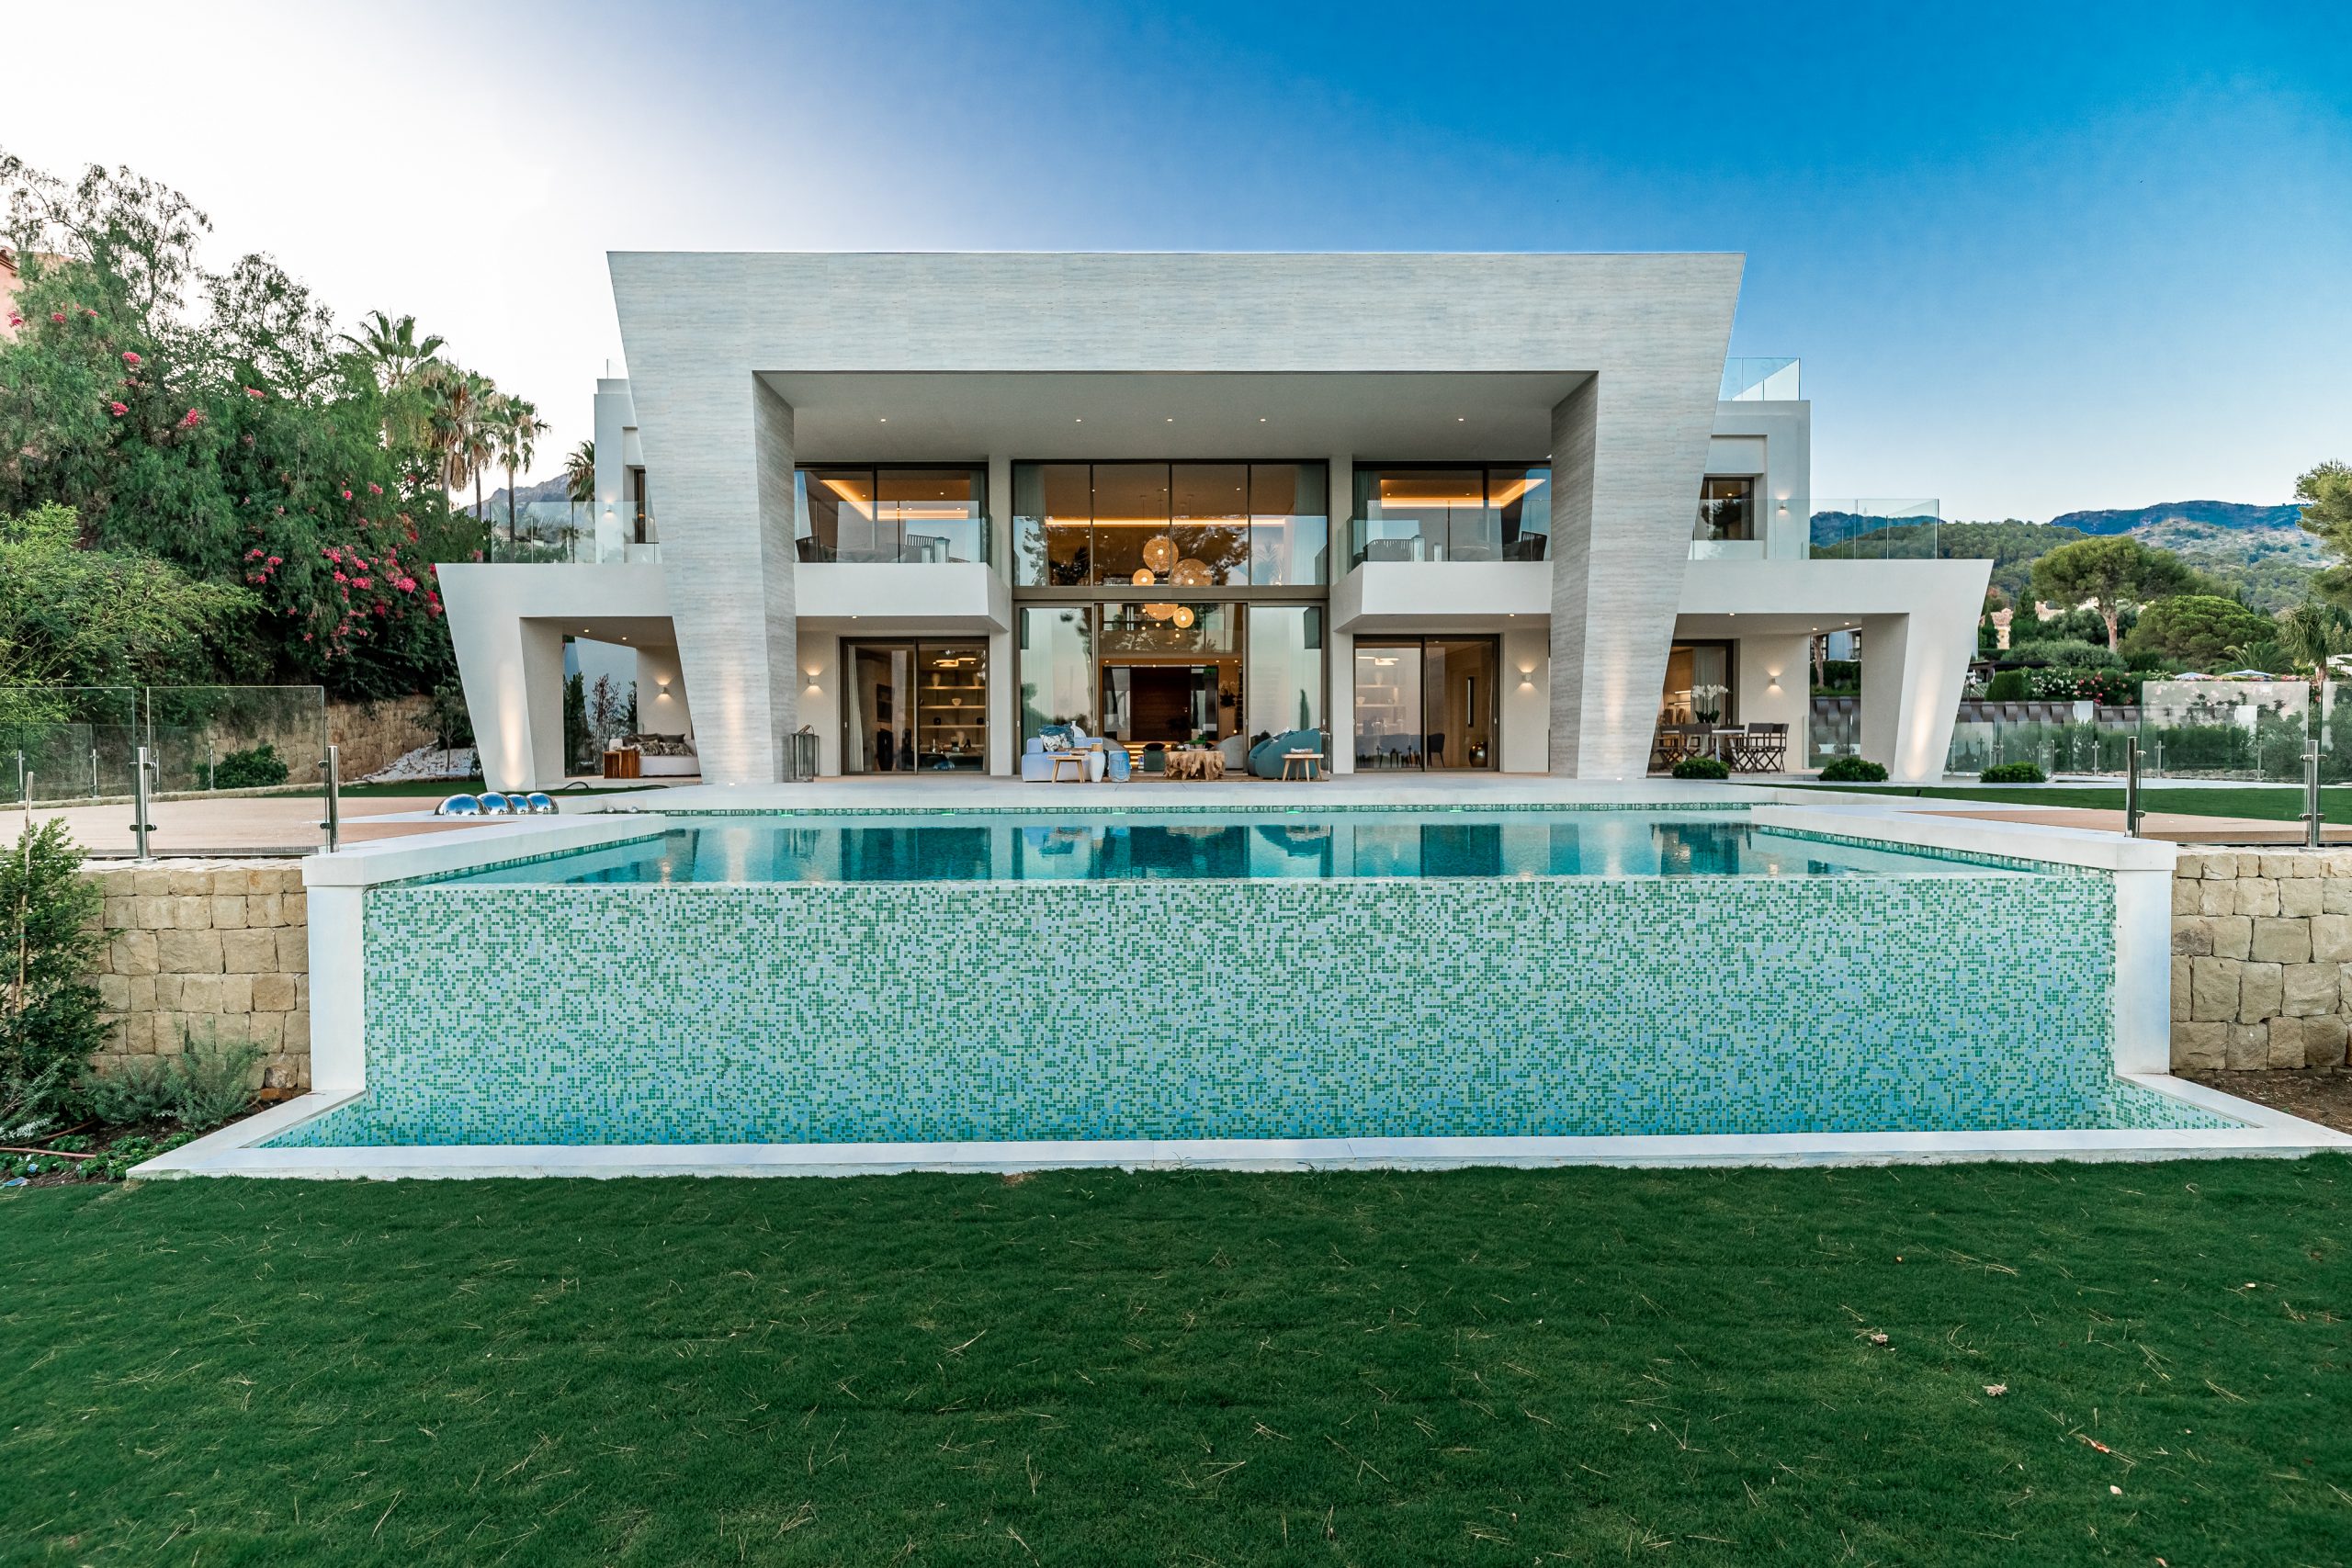 Villa Los Ángeles - An Intelligent Home. This contemporary home redefines true luxury in Marbella offering exceptional design in a prime location. 